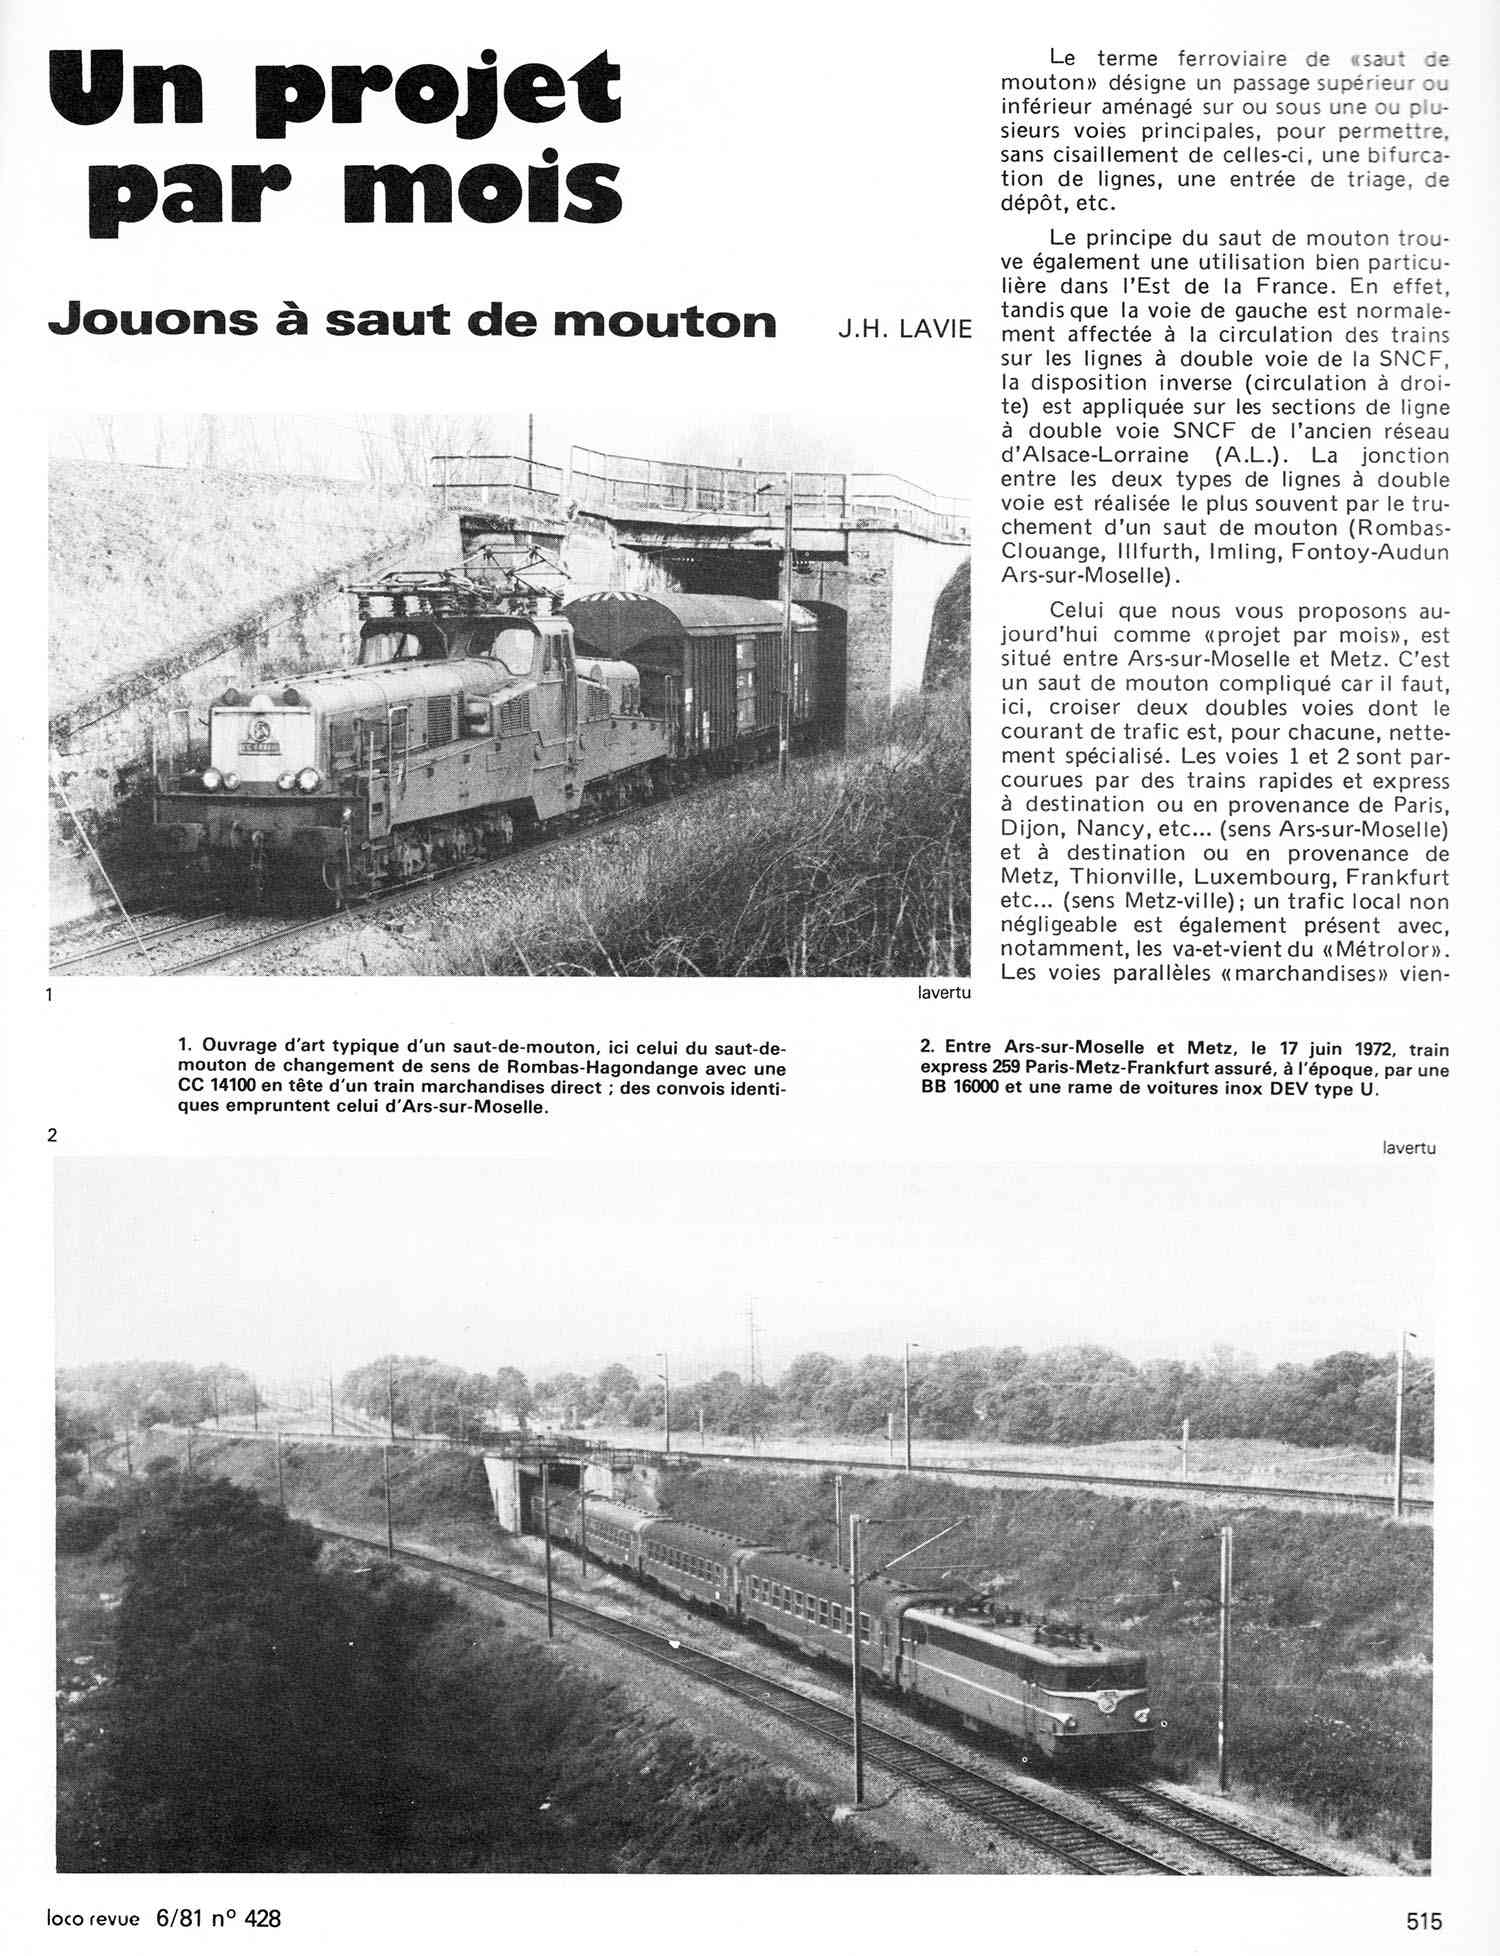 Caténaire 25 000 V SNCF - Page 6 Loco_r10